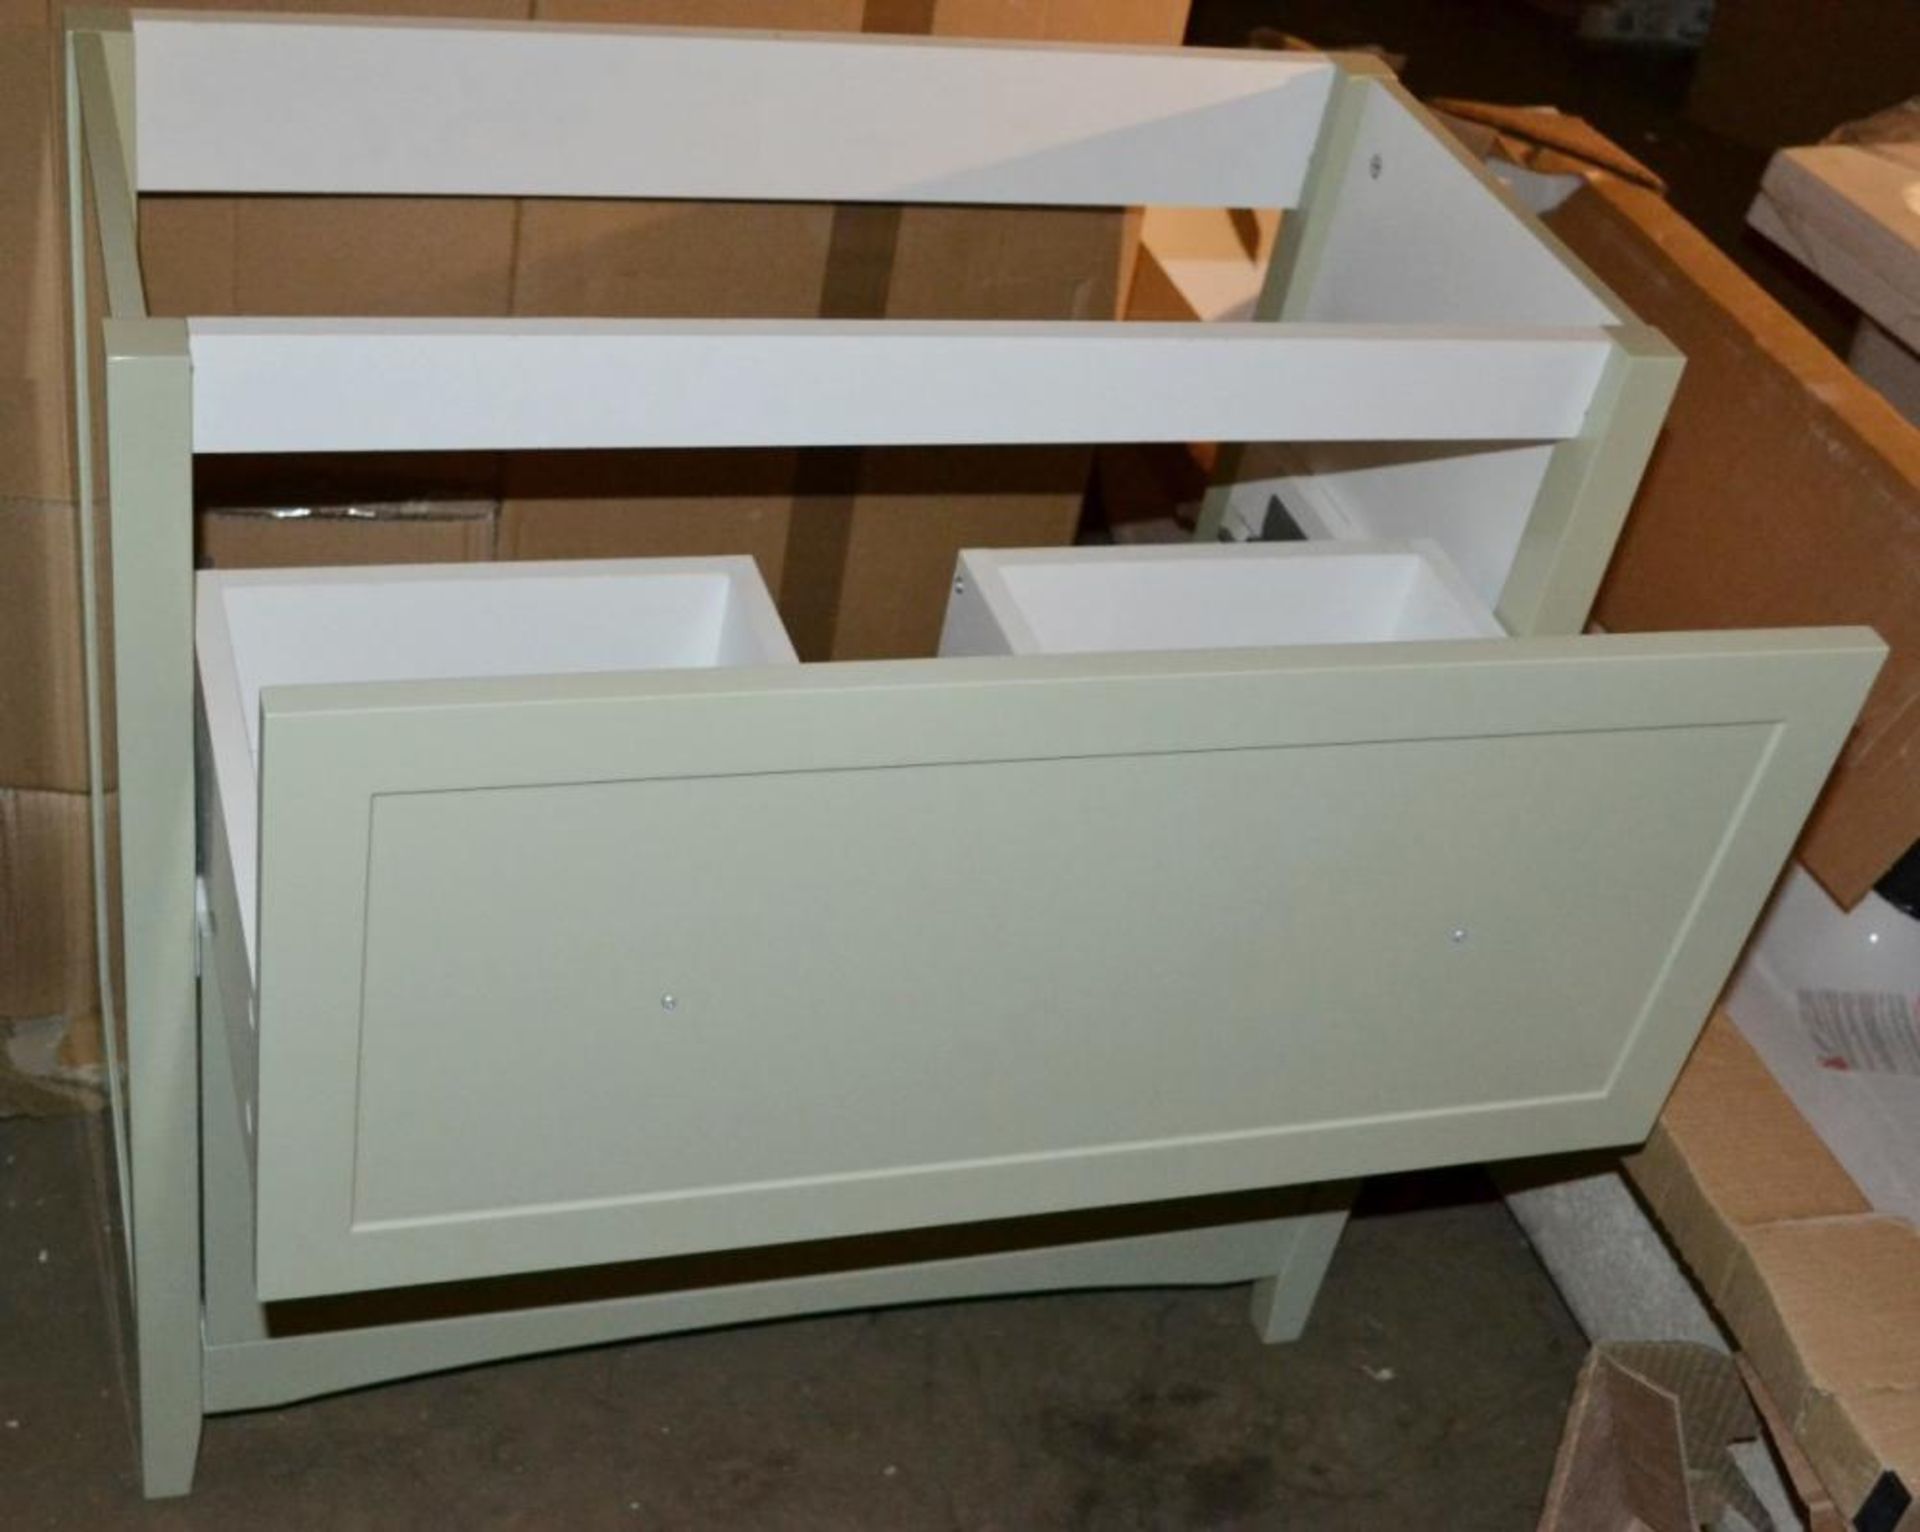 1 x Camberley 800 2-Drawer Soft Close Vanity Unit In Sage Green - New / Unused Stock - Dimensions: W - Image 5 of 8